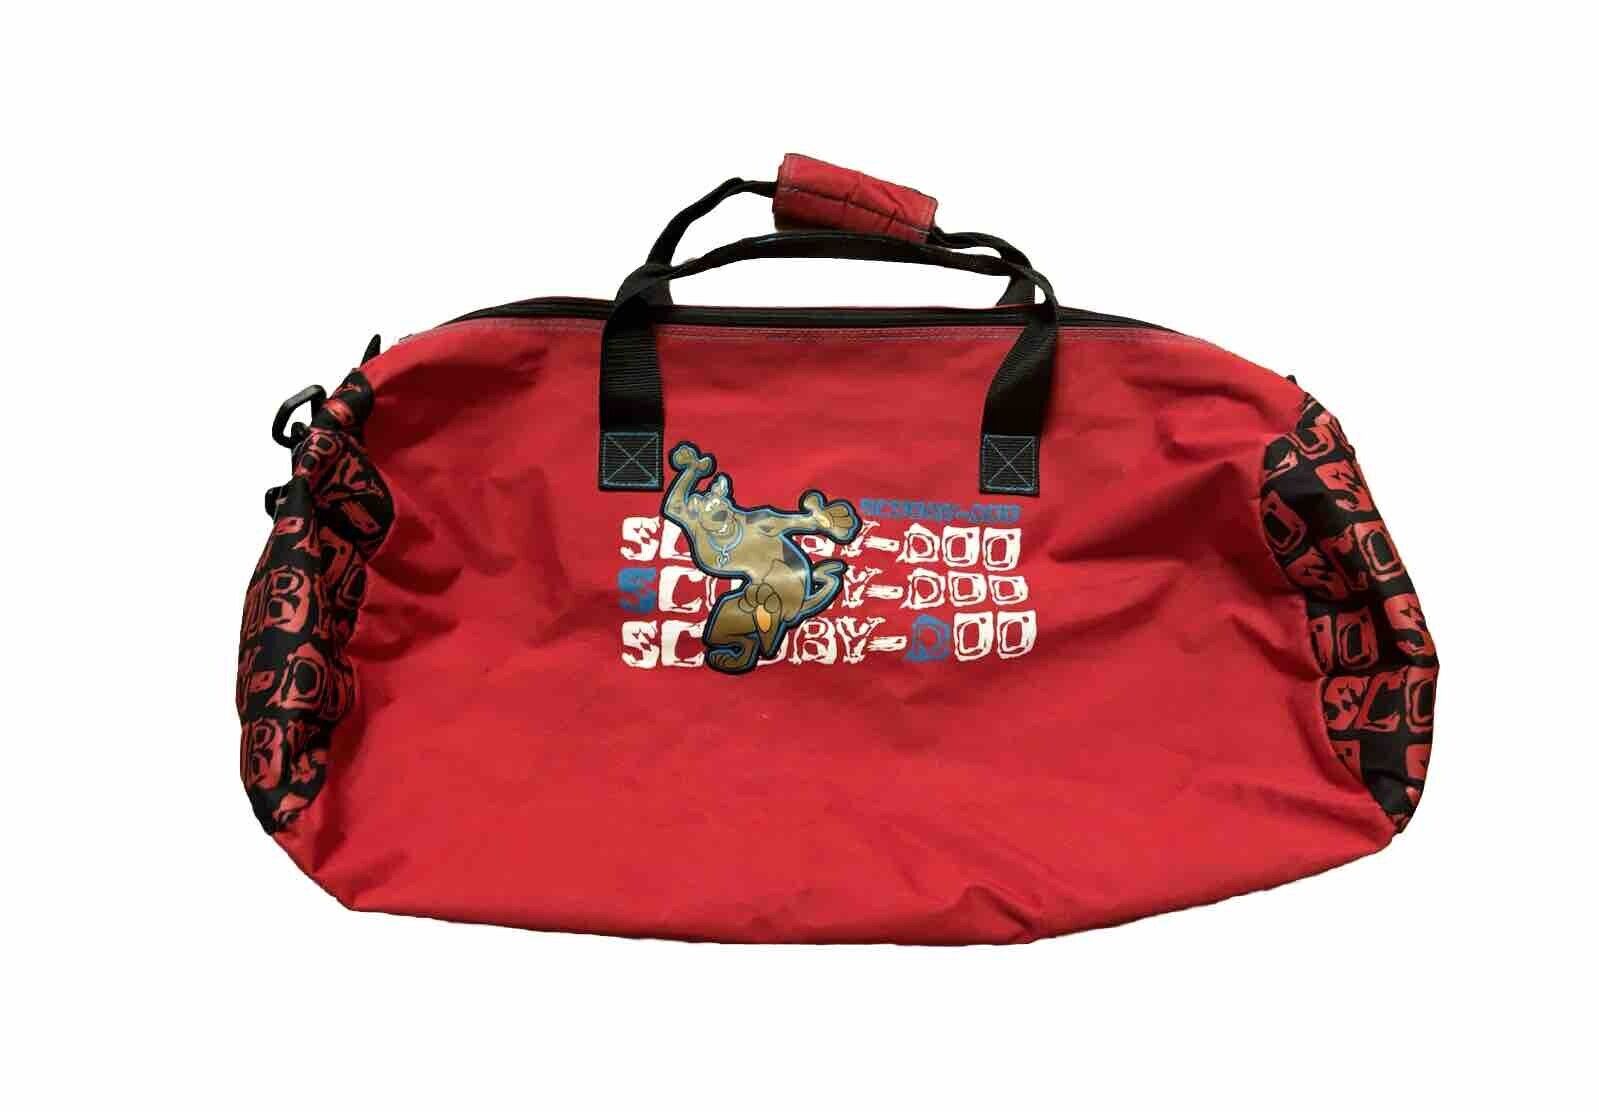 Vintage Scooby-Doo Red Duffle Gym Travel Bag